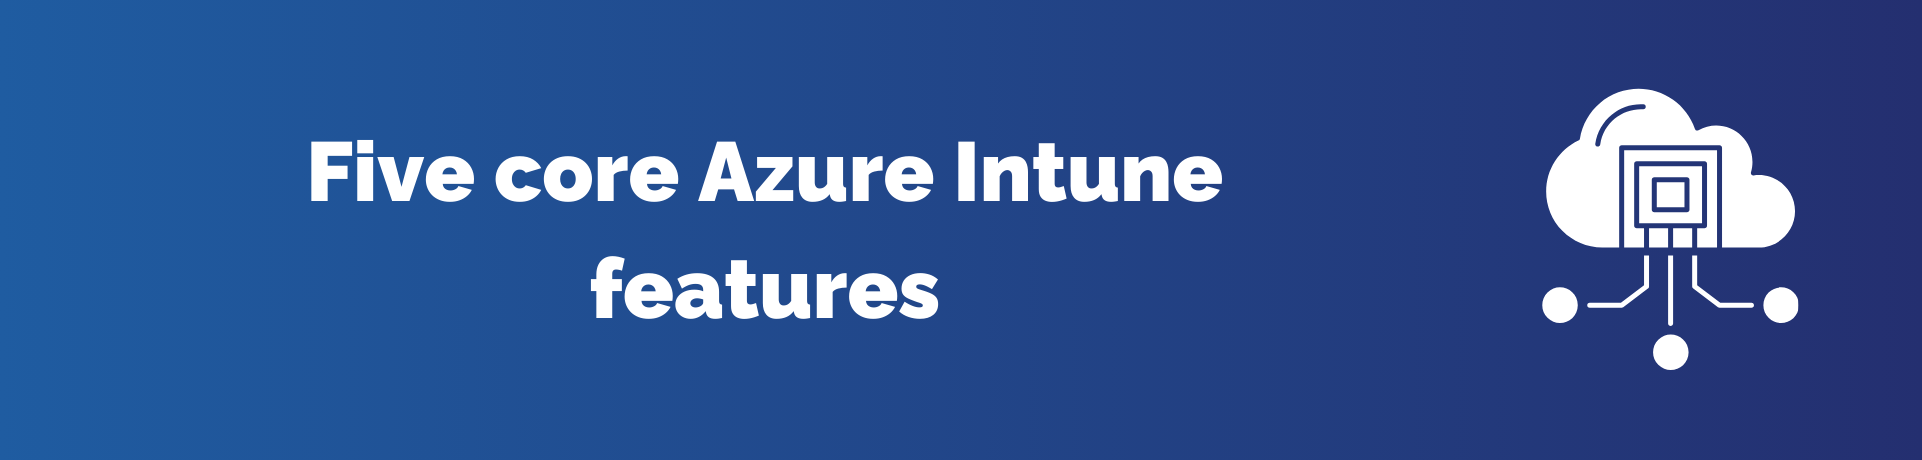 Azure Intune: Enhancing Endpoint Administration with Five Core Features Image